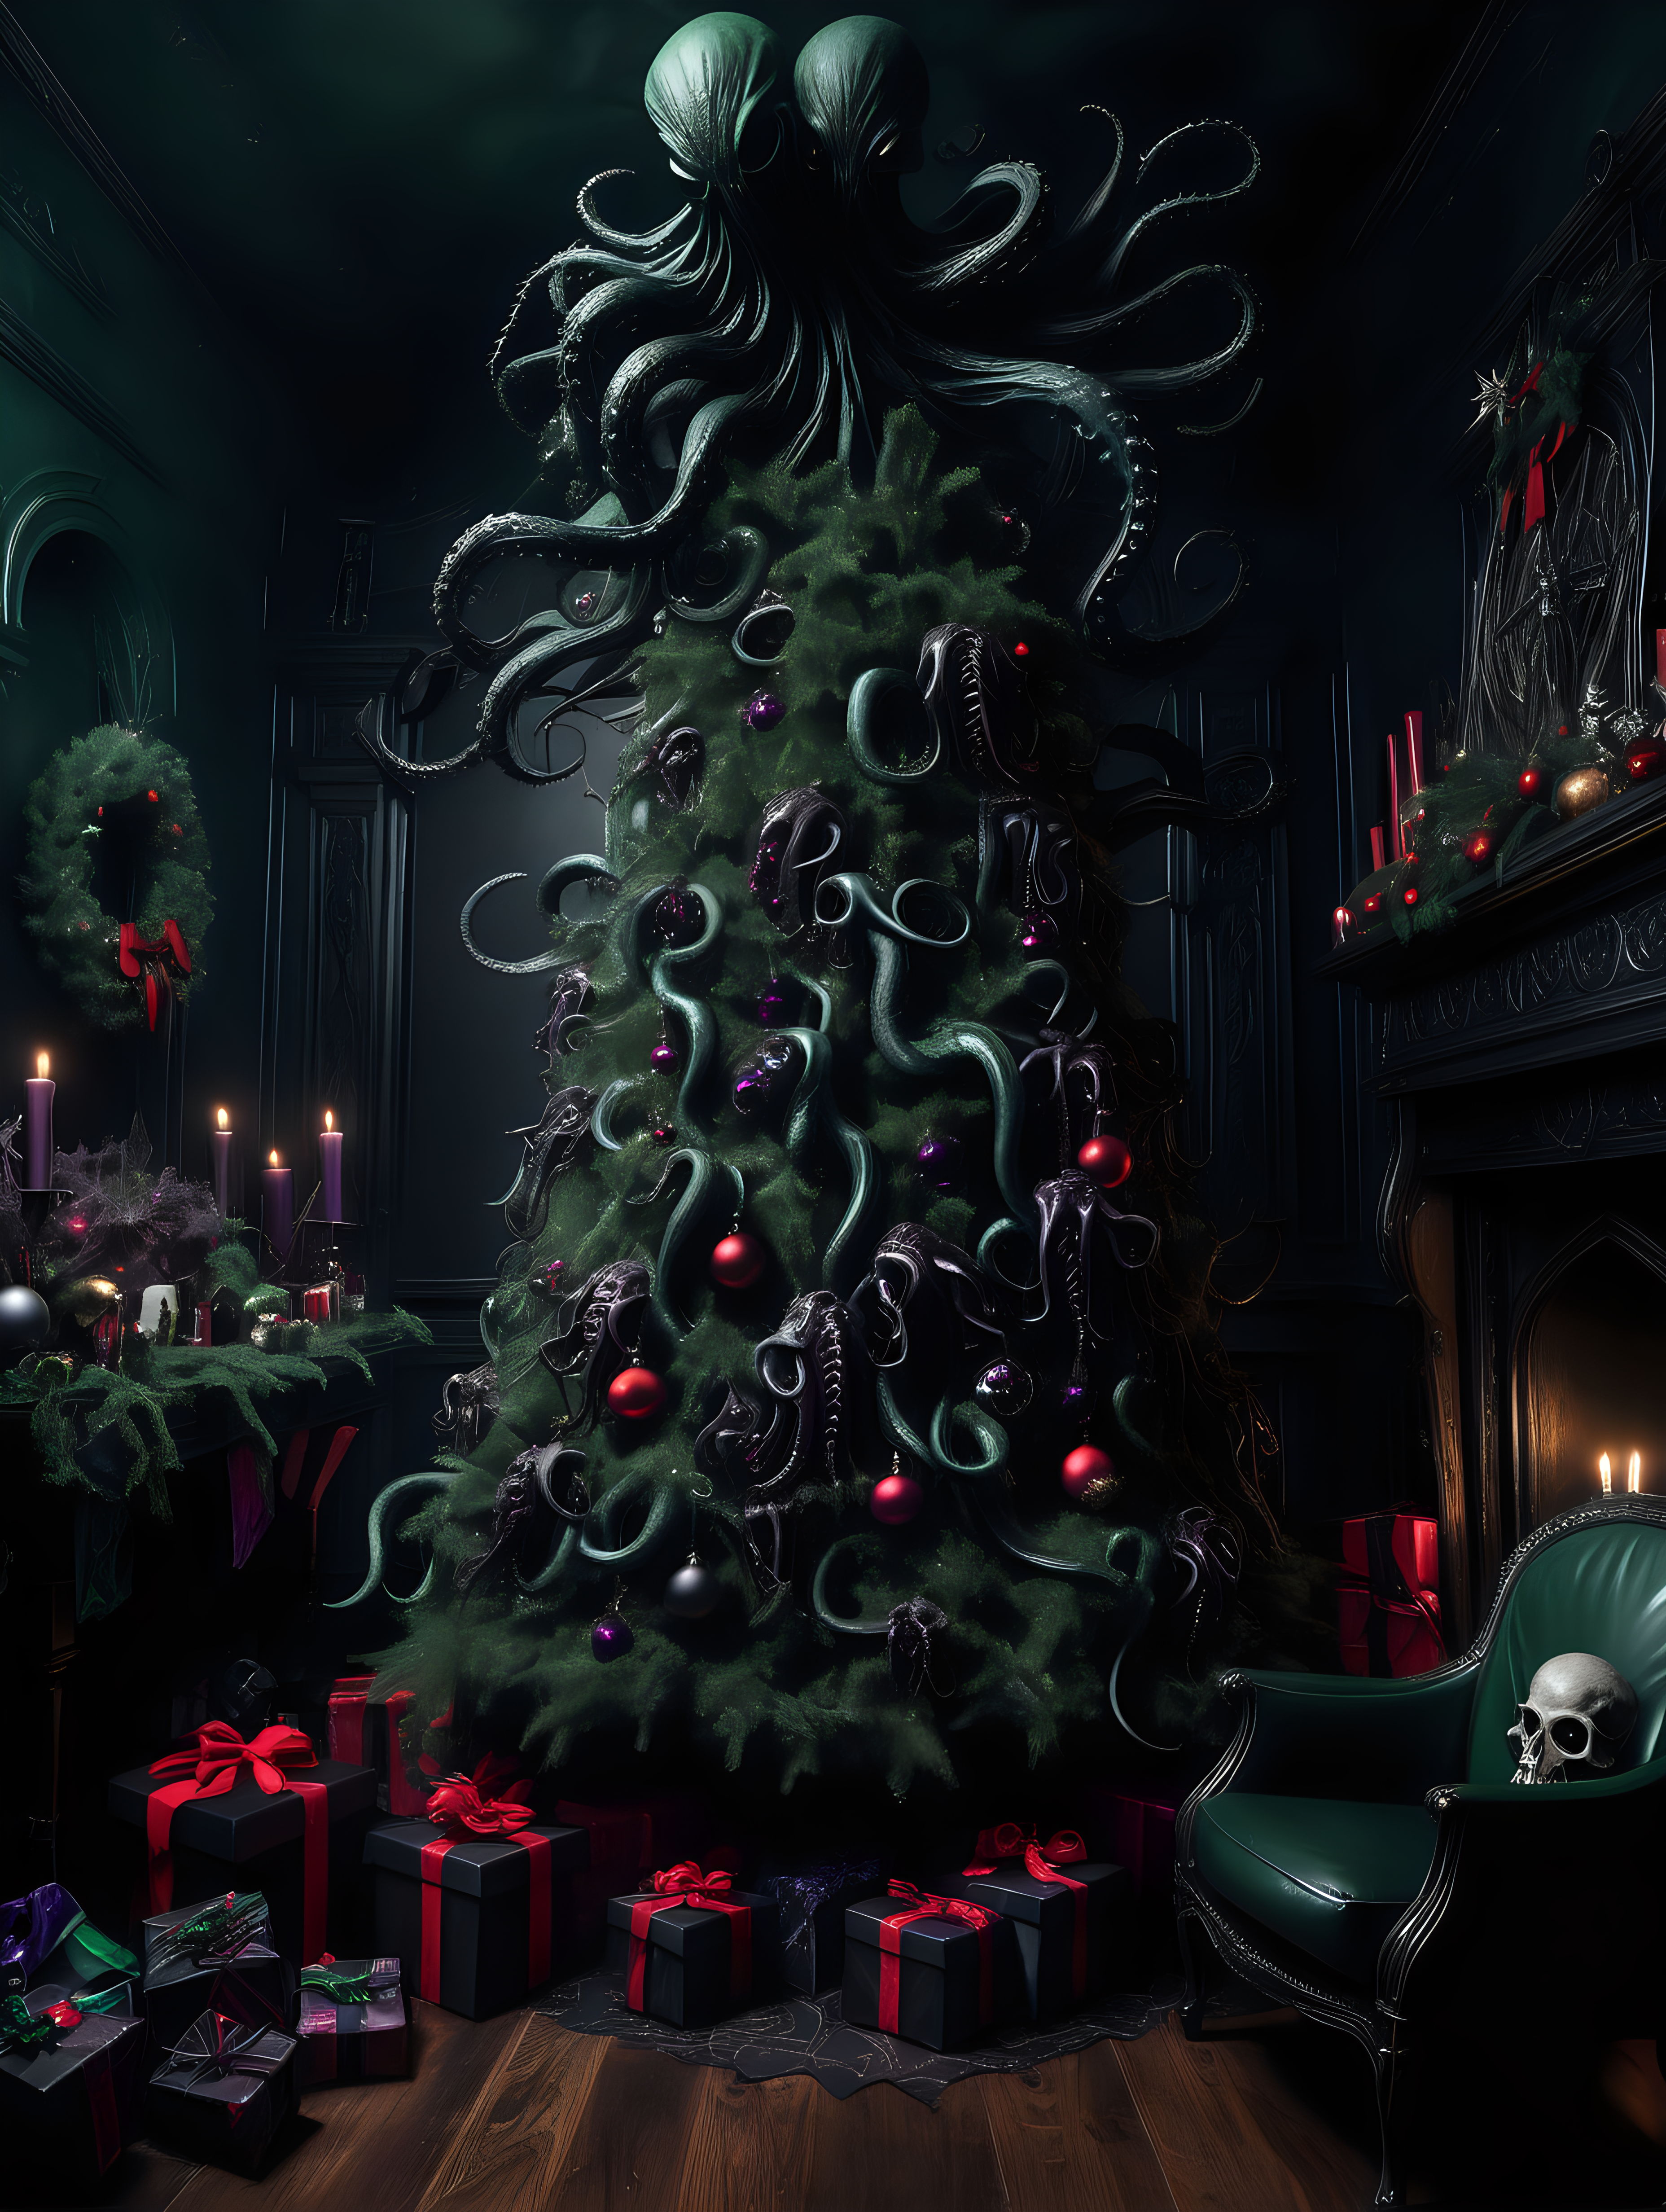 A dark gothic Christmas tree in a dark gothic room. Tree is decorated by sinister eldritch decorations and has the tentacles of Cthulhu coming through the branches in a menacing way. The tentacles must be dark greens. The whole feel of the picture should be eldritch and gothic, dark tines and sinister.  There are various presents under the tree, these are also decorated in eldritch gothic style